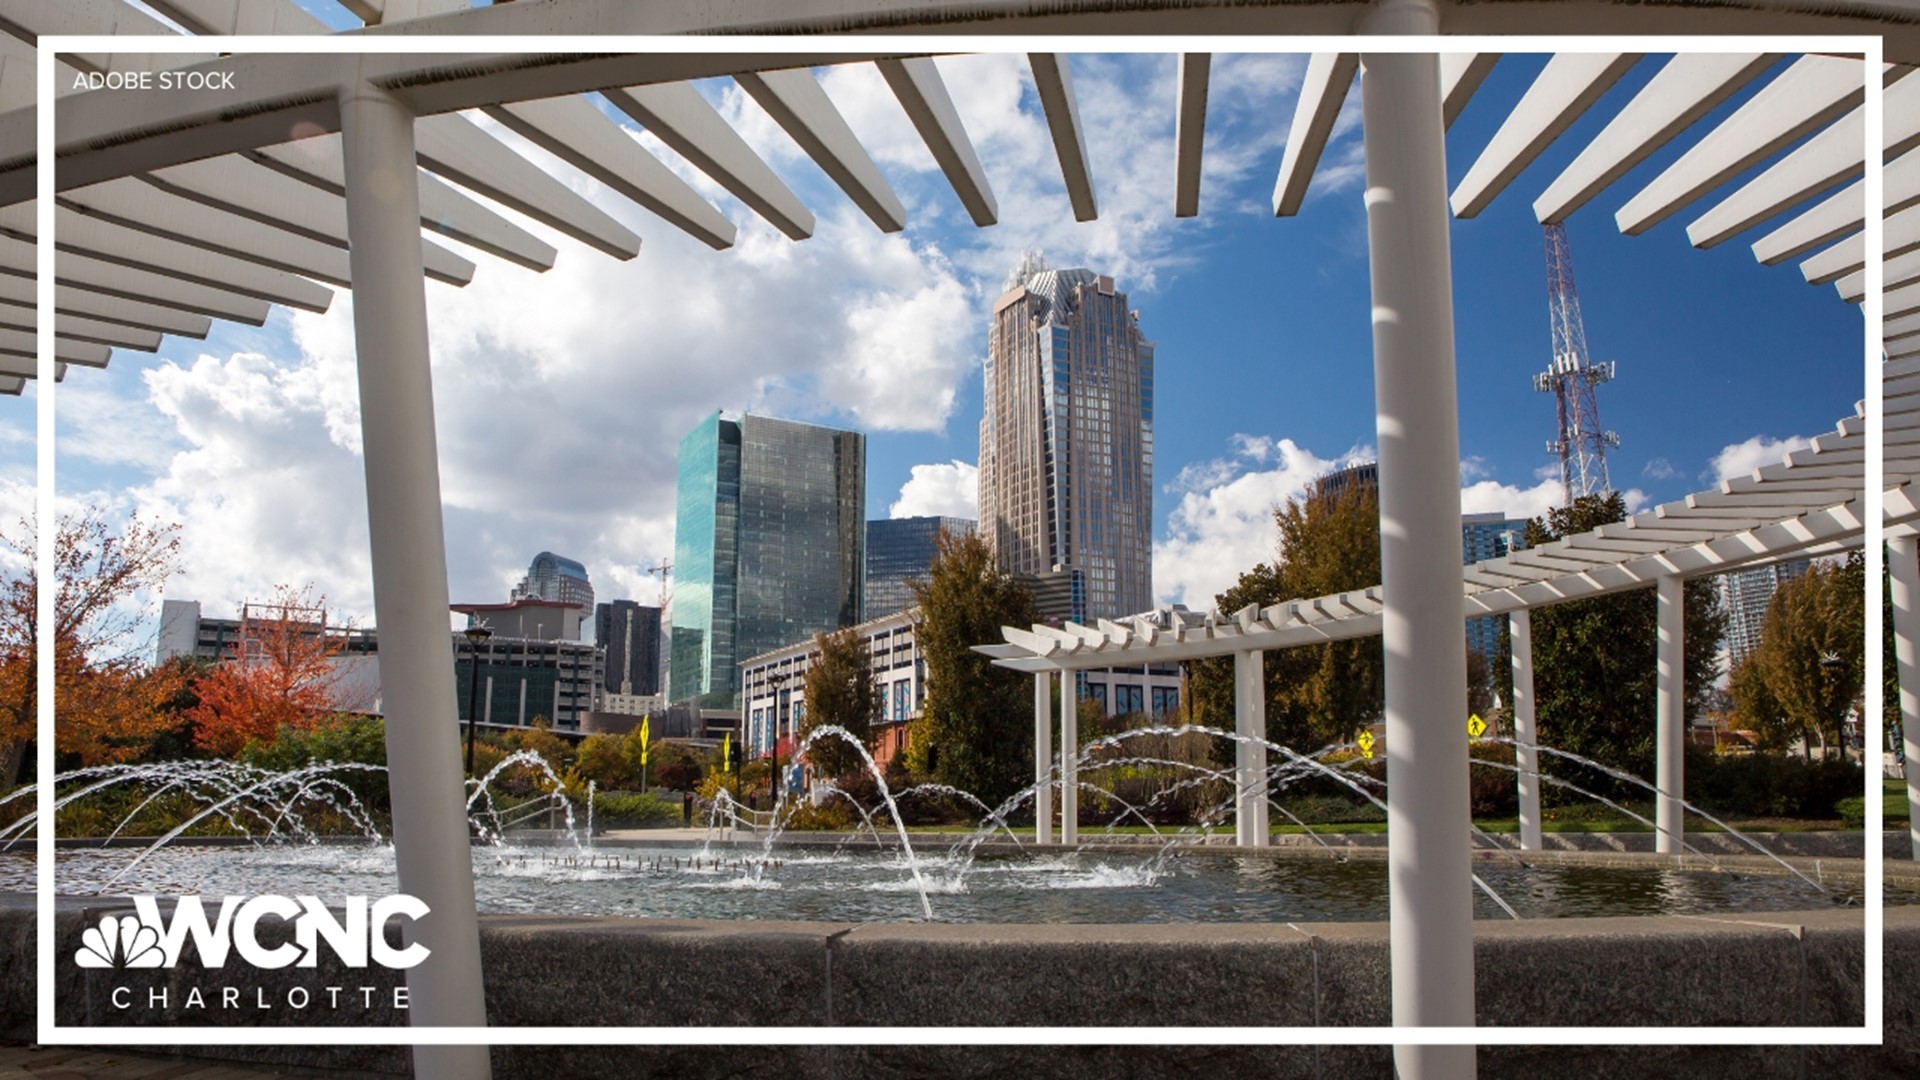 It'll be a gorgeous spring weekend in the Carolinas, so take the time to enjoy the Easter holiday, Charlotte SHOUT! and more in the Queen City.